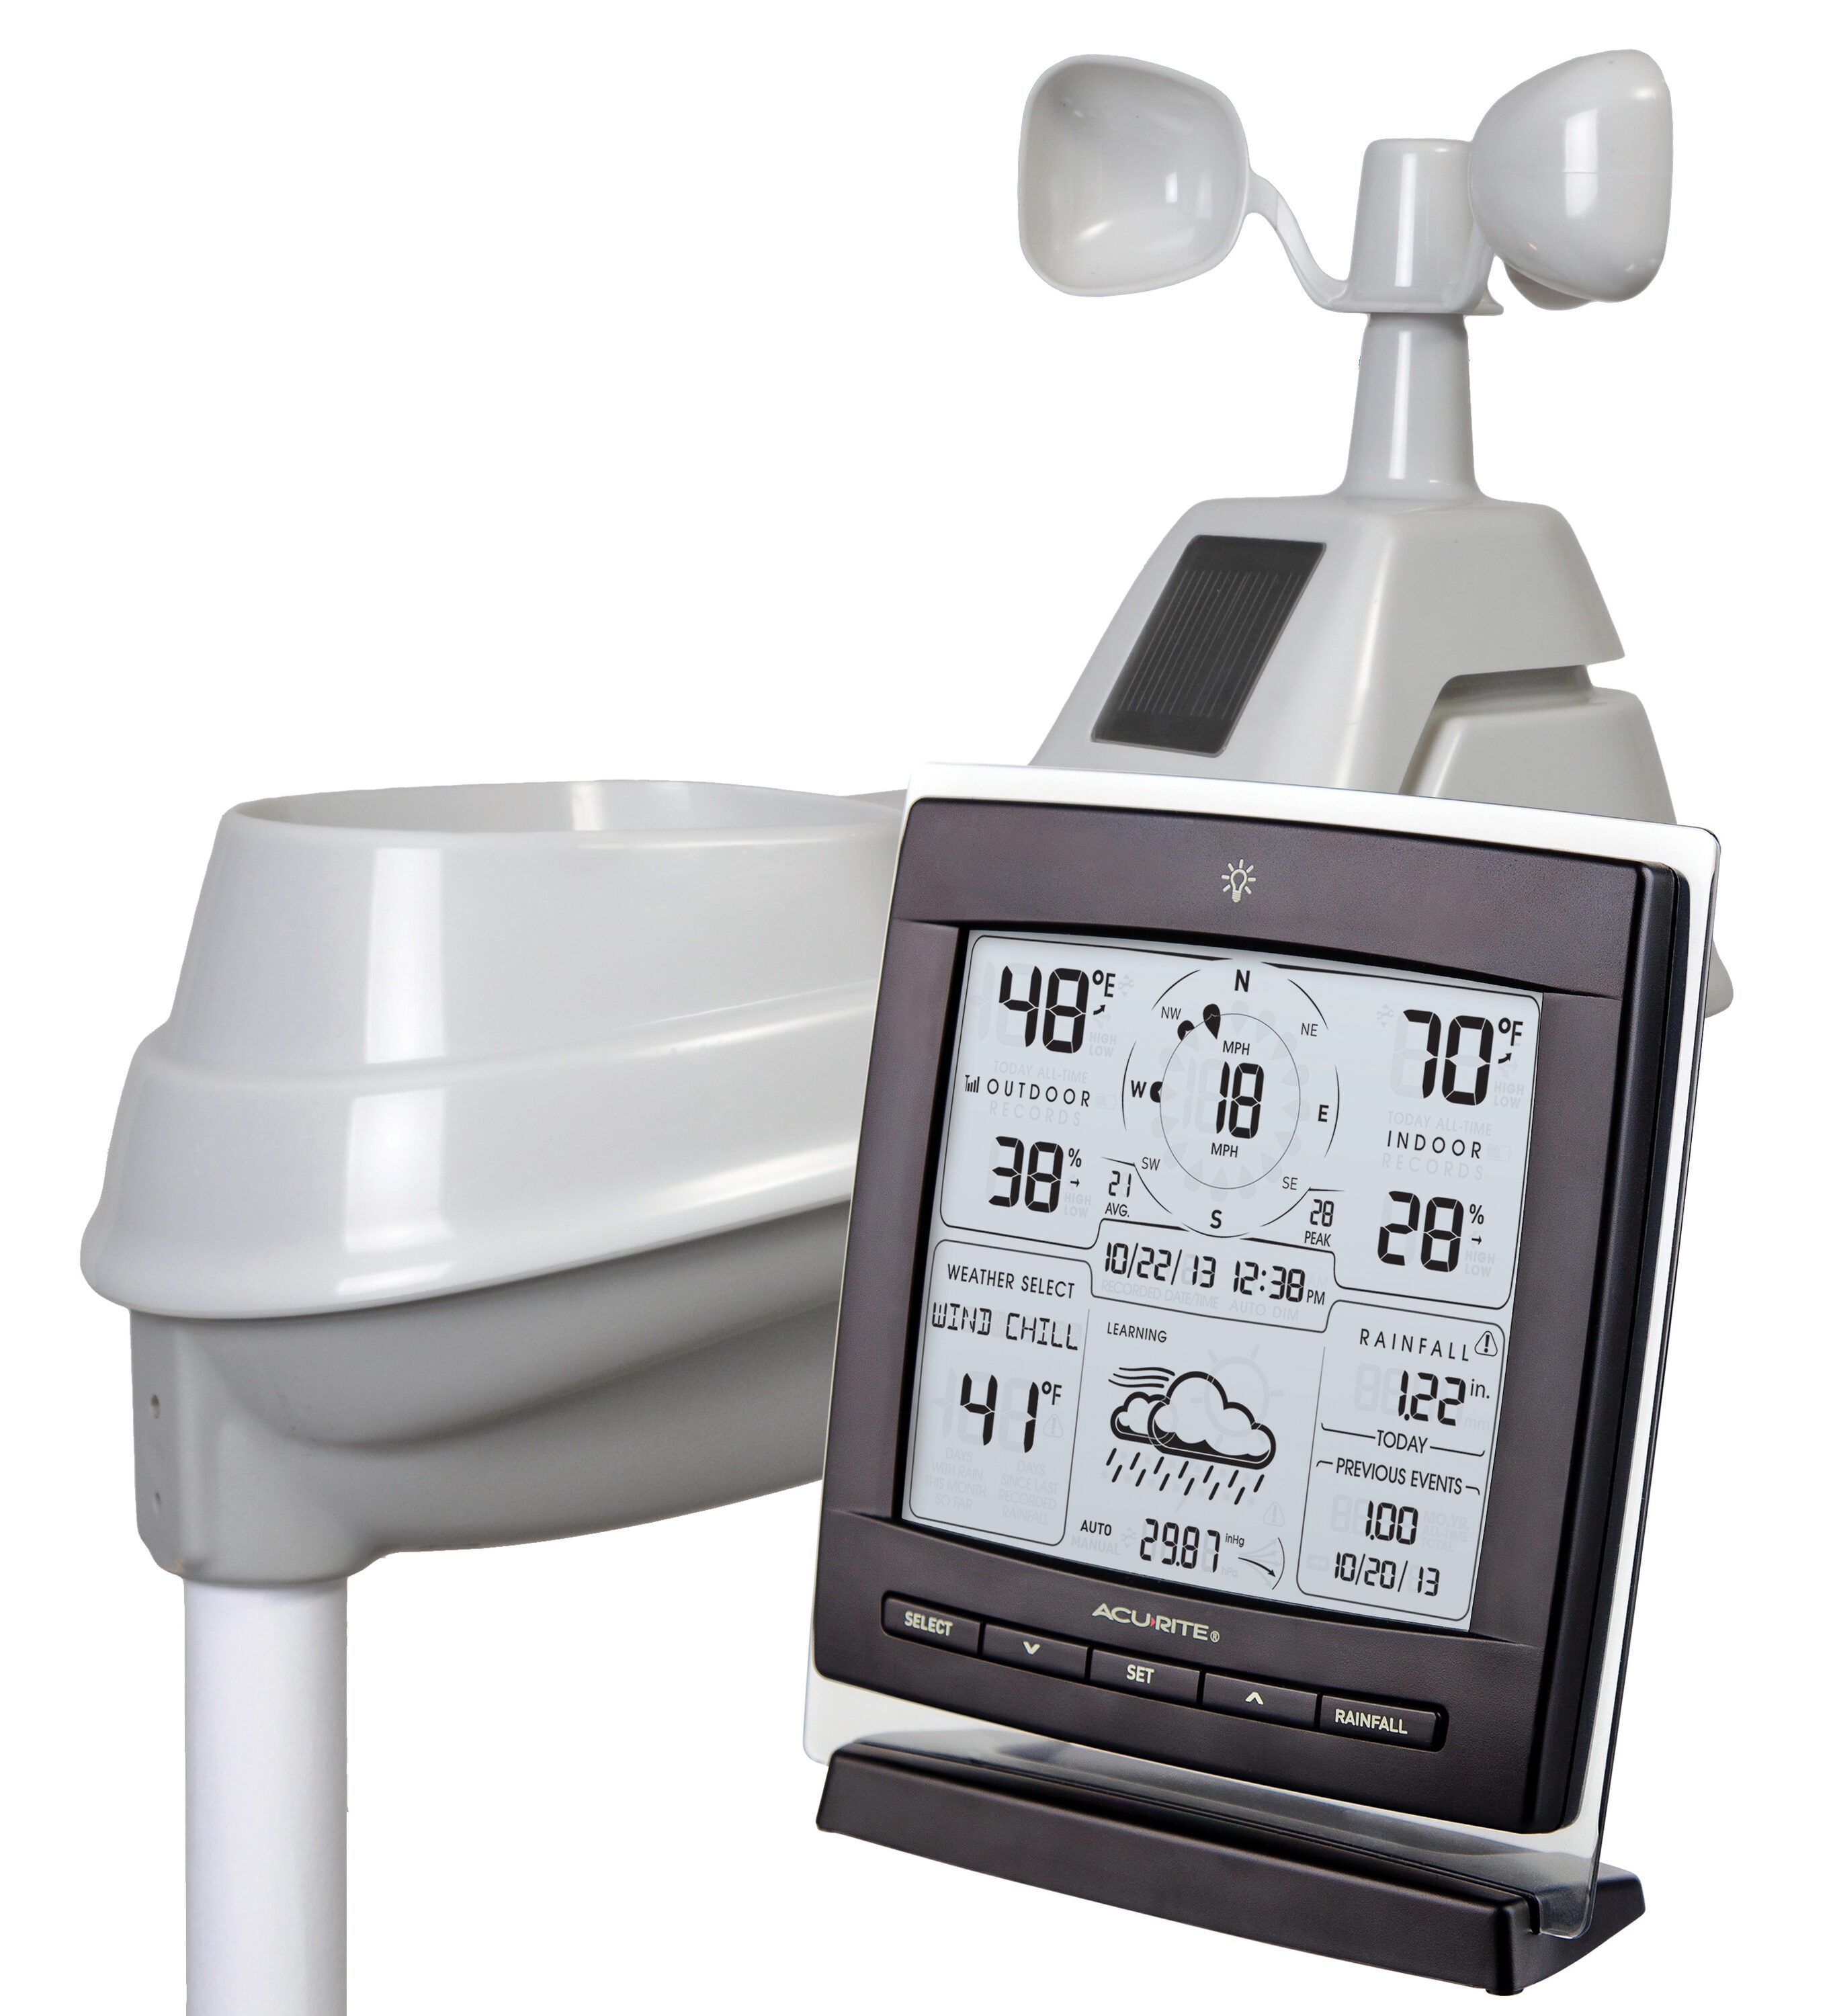 AcuRite Wireless Color Digital Weather Station